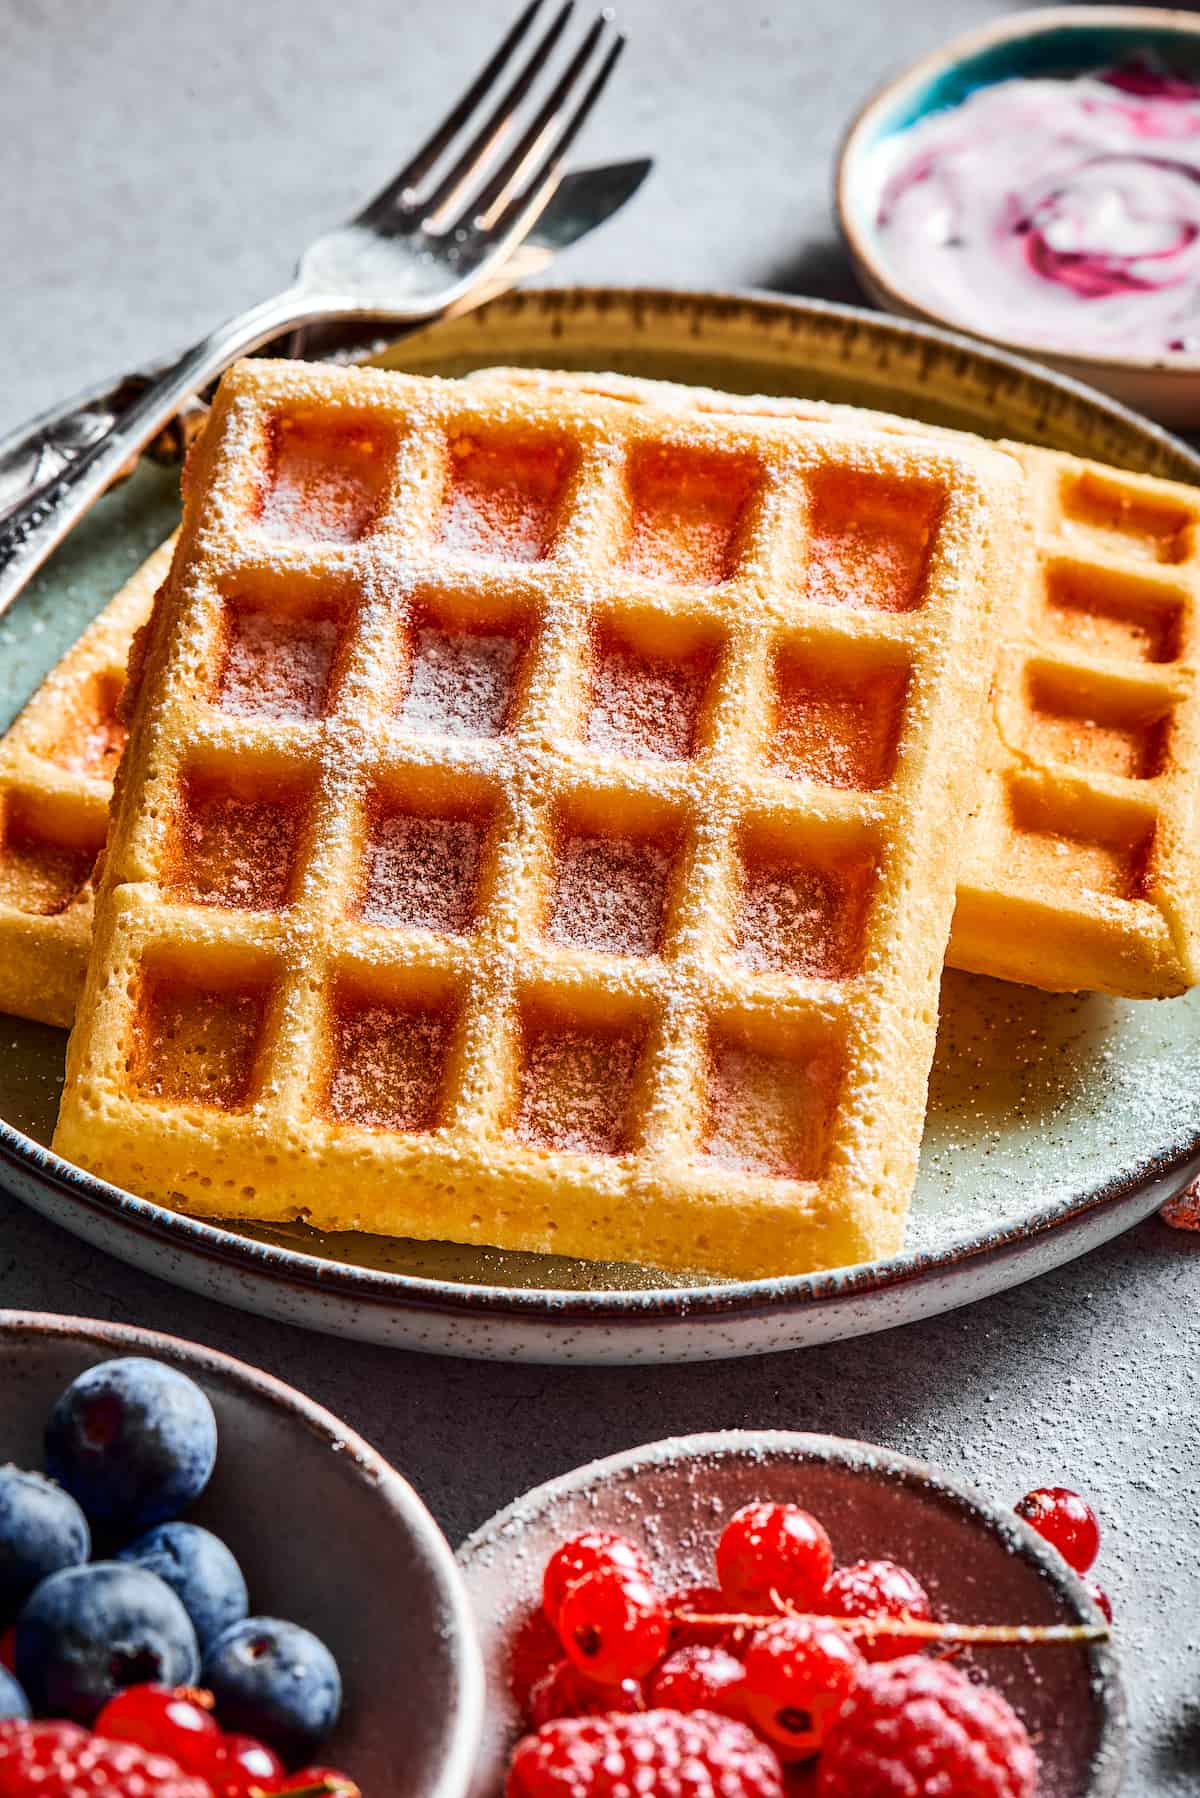 Golden brown waffles dusted with powdered sugar.